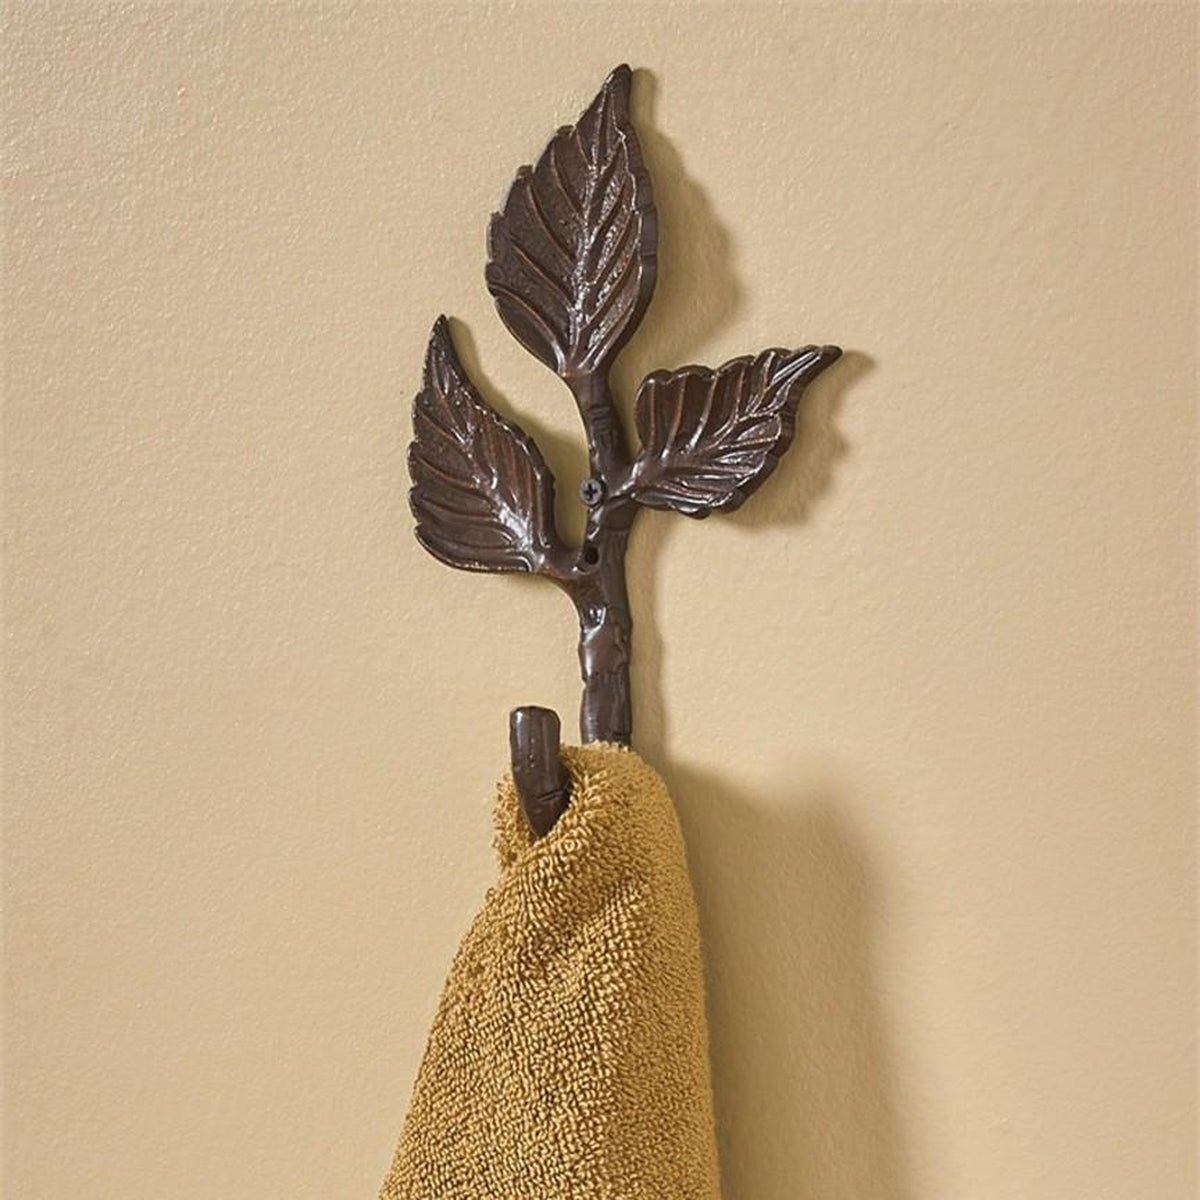 Wrought Iron Towel Hooks - Iron Accents